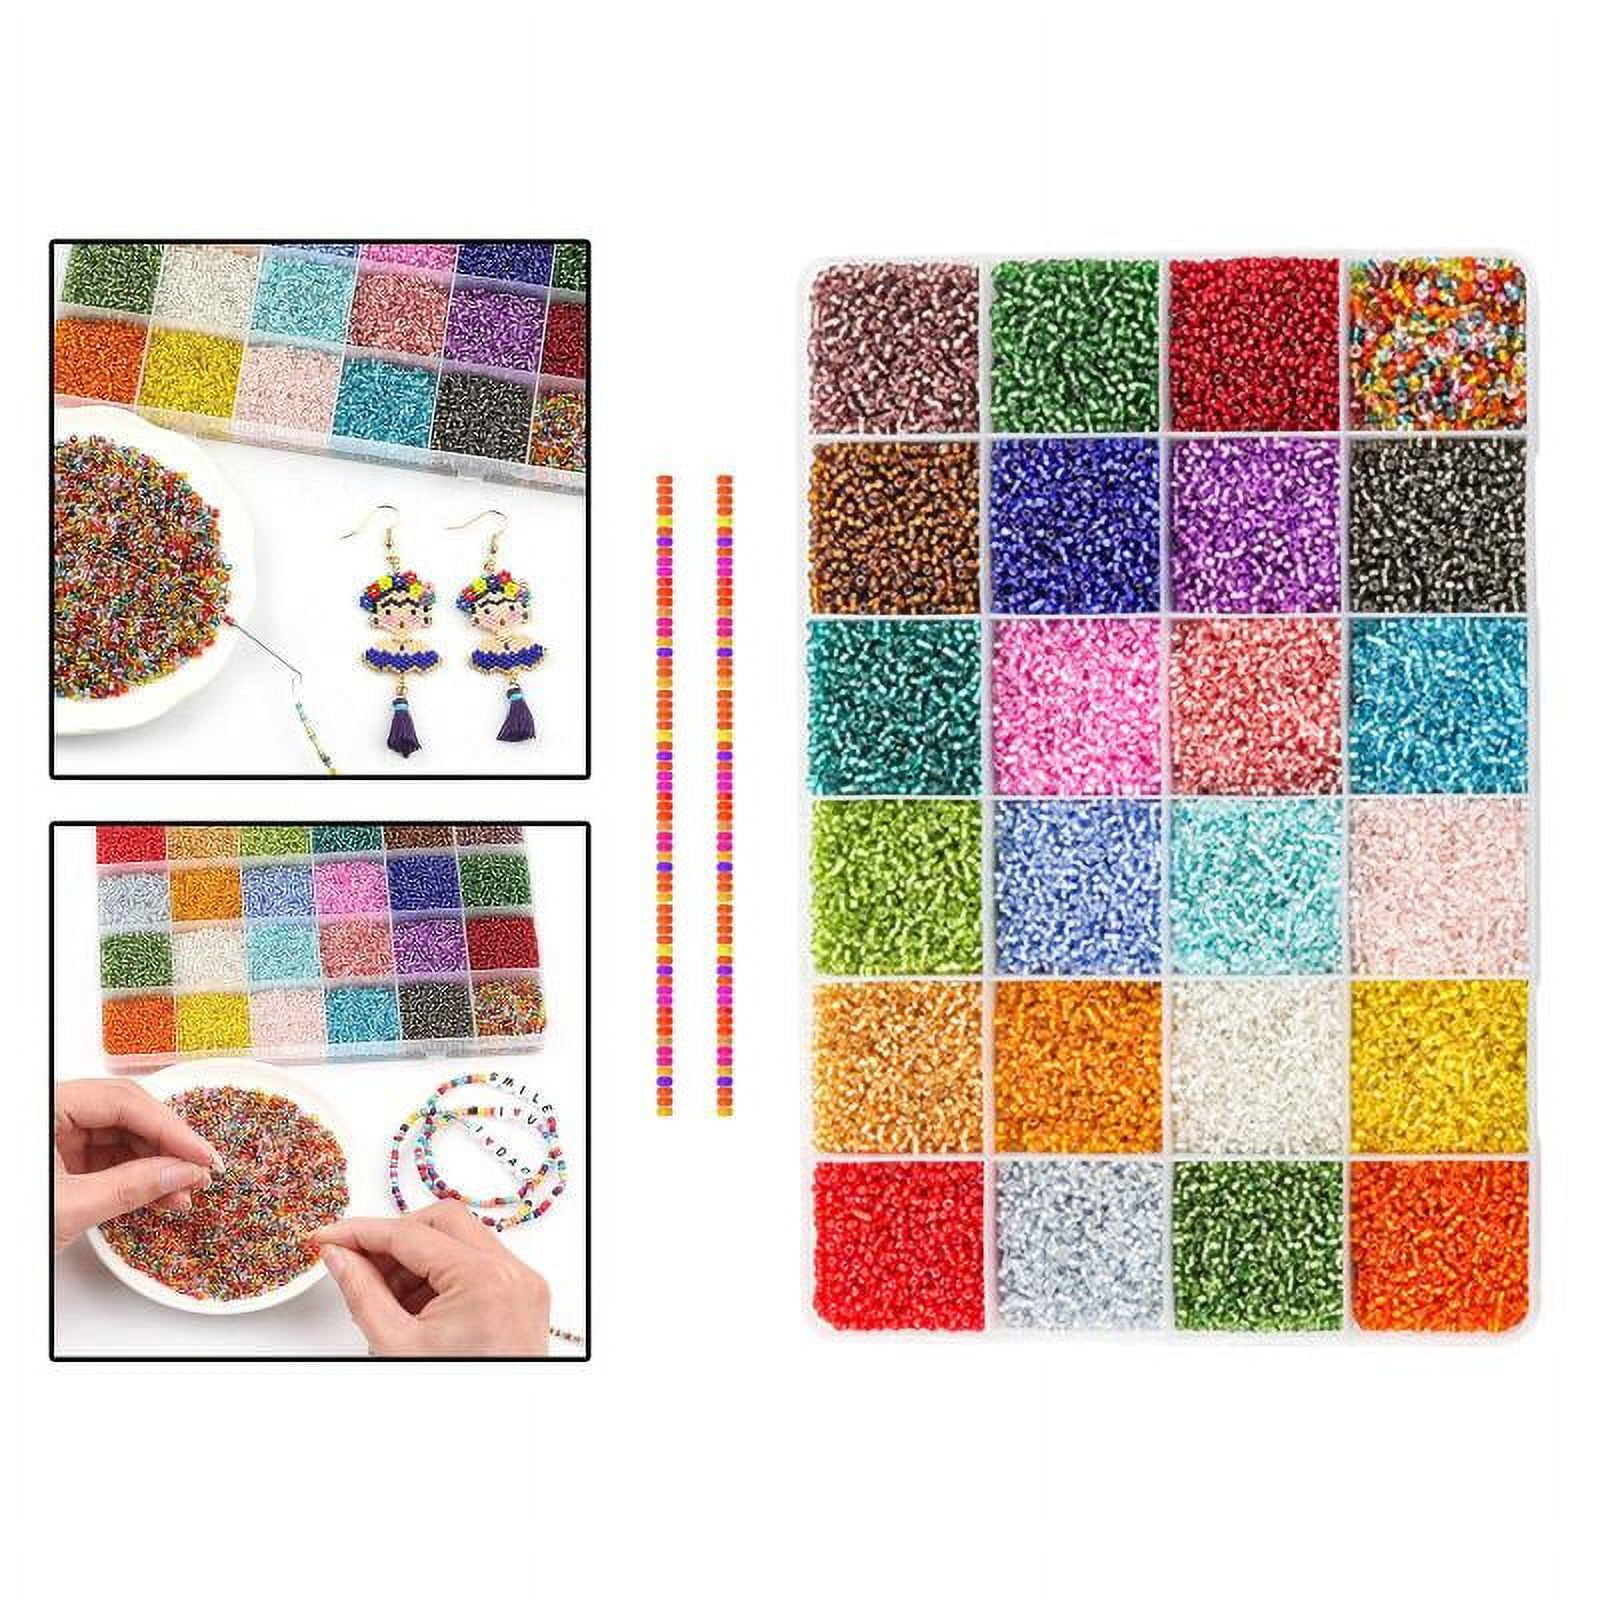 17000pcs 2mm glass seed bead manufacturing kit, small bead